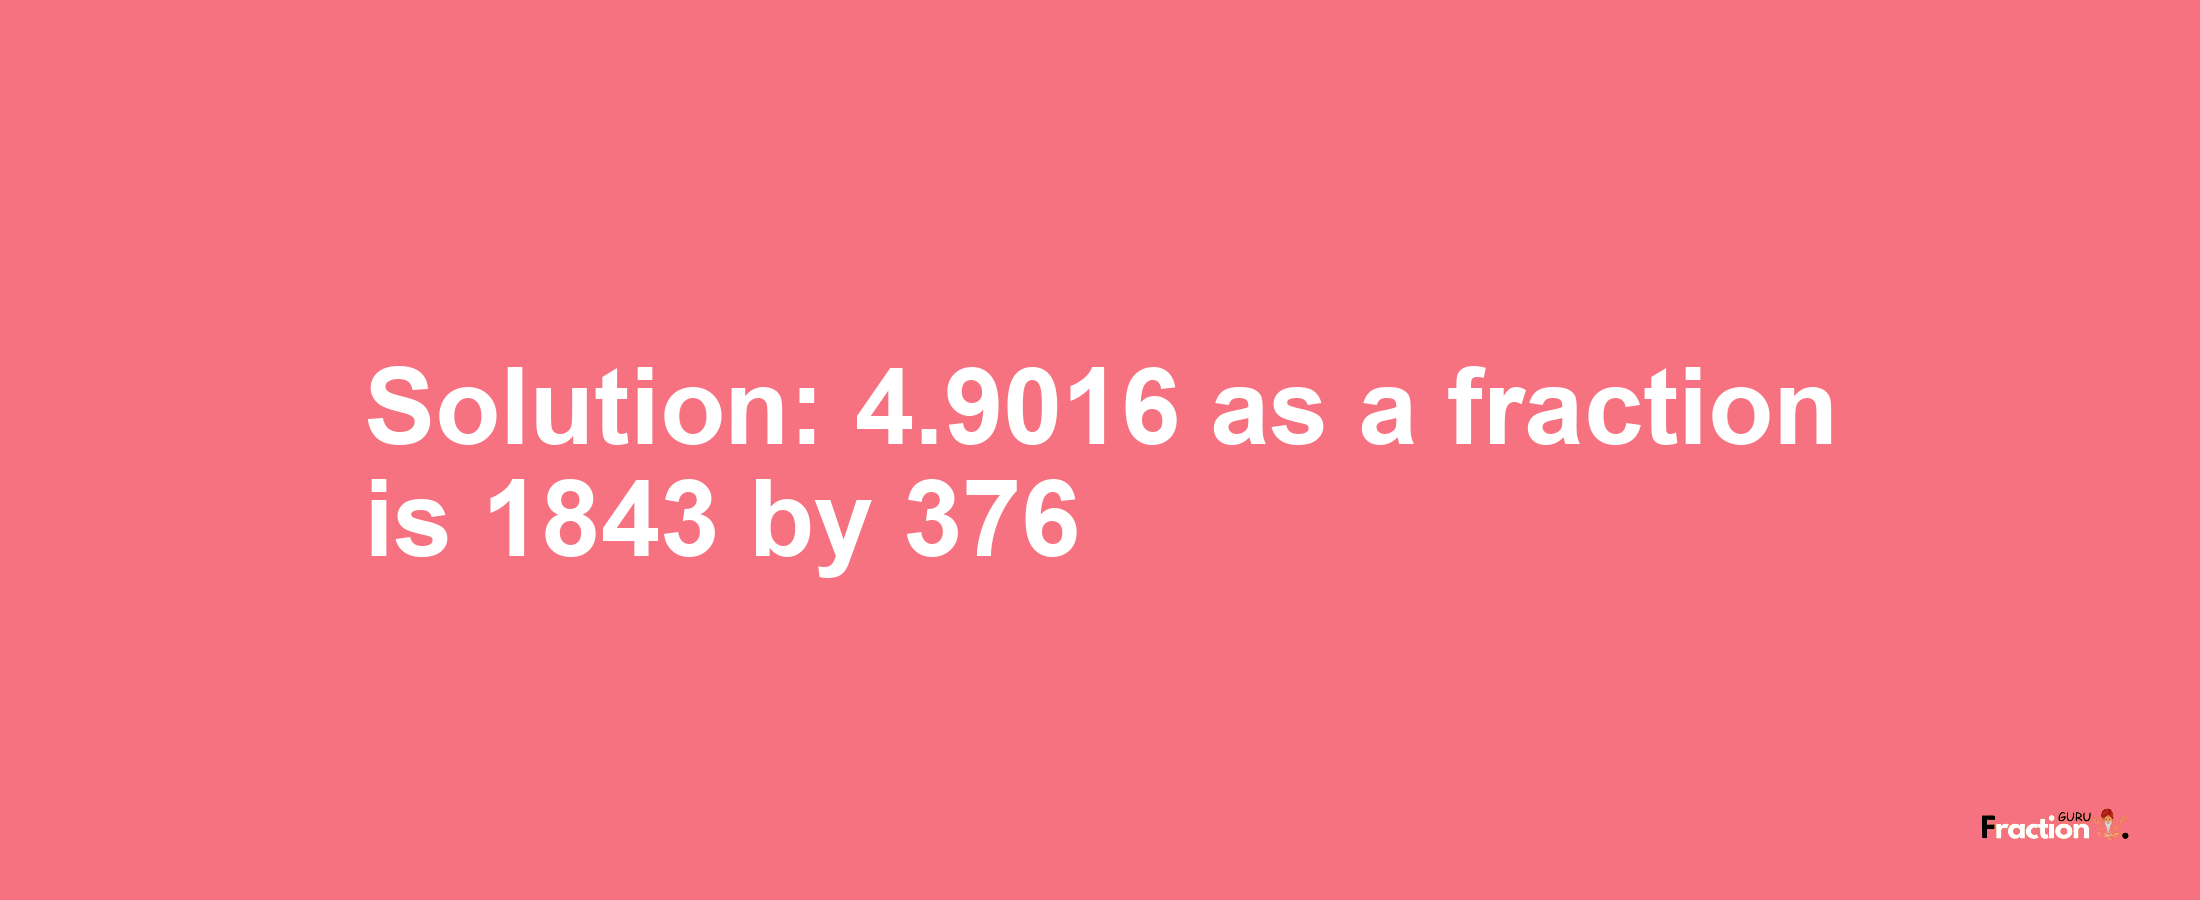 Solution:4.9016 as a fraction is 1843/376